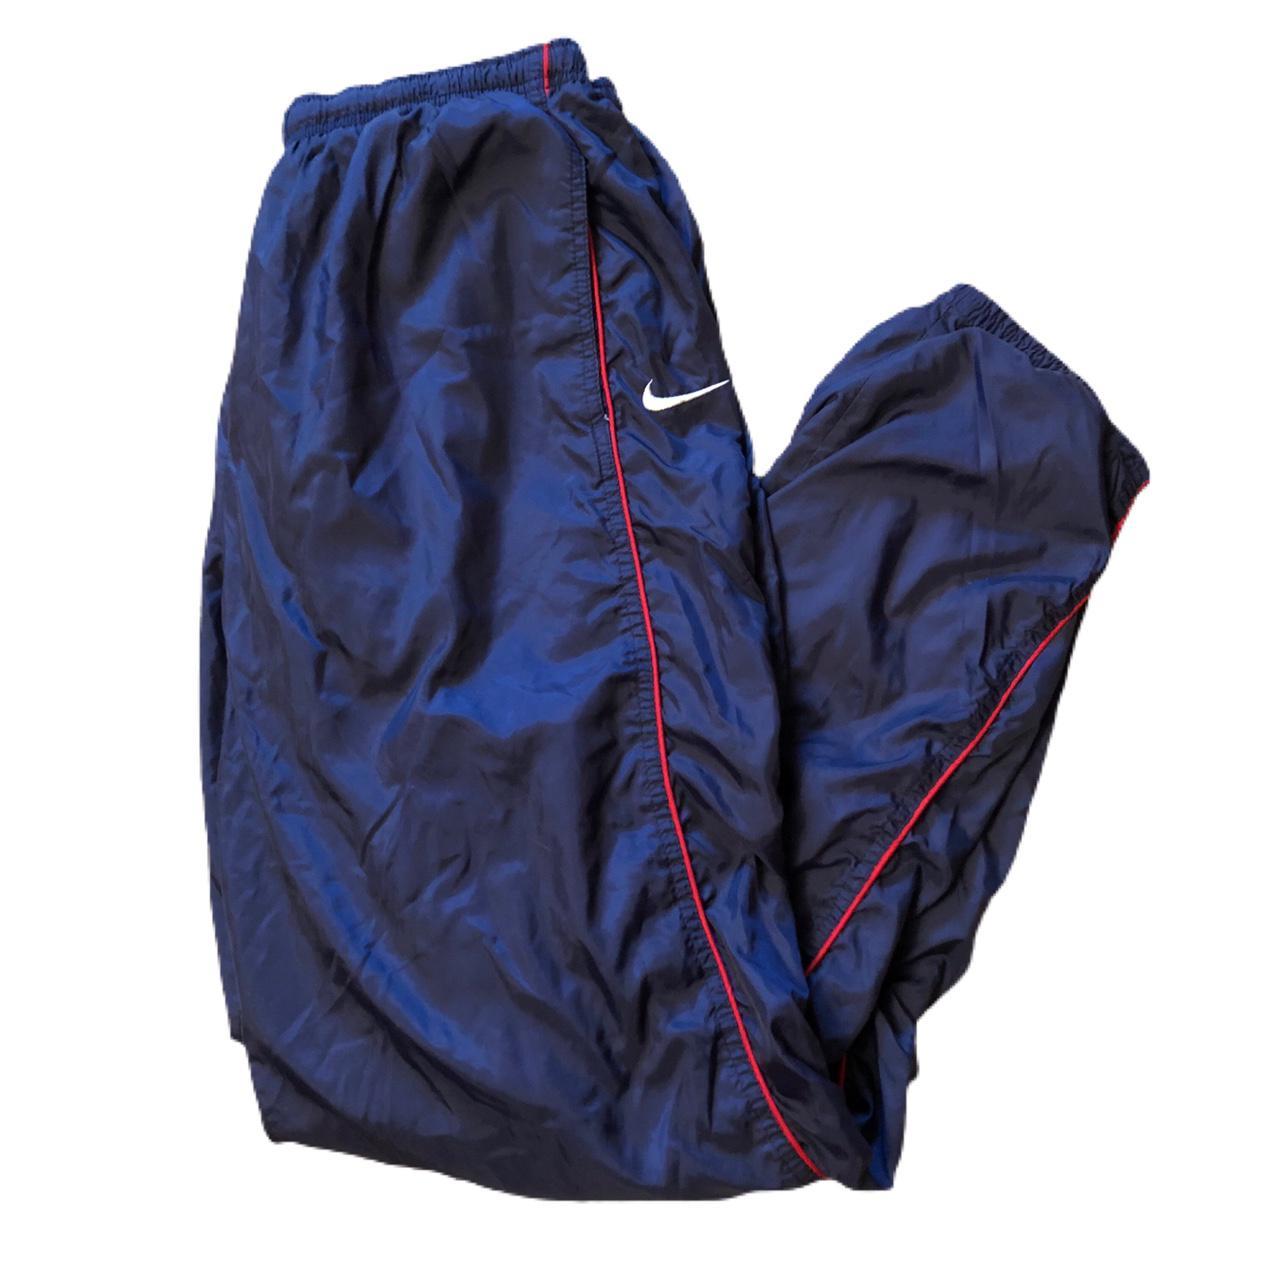 Product Image 3 - Vintage 90s lined Nike track